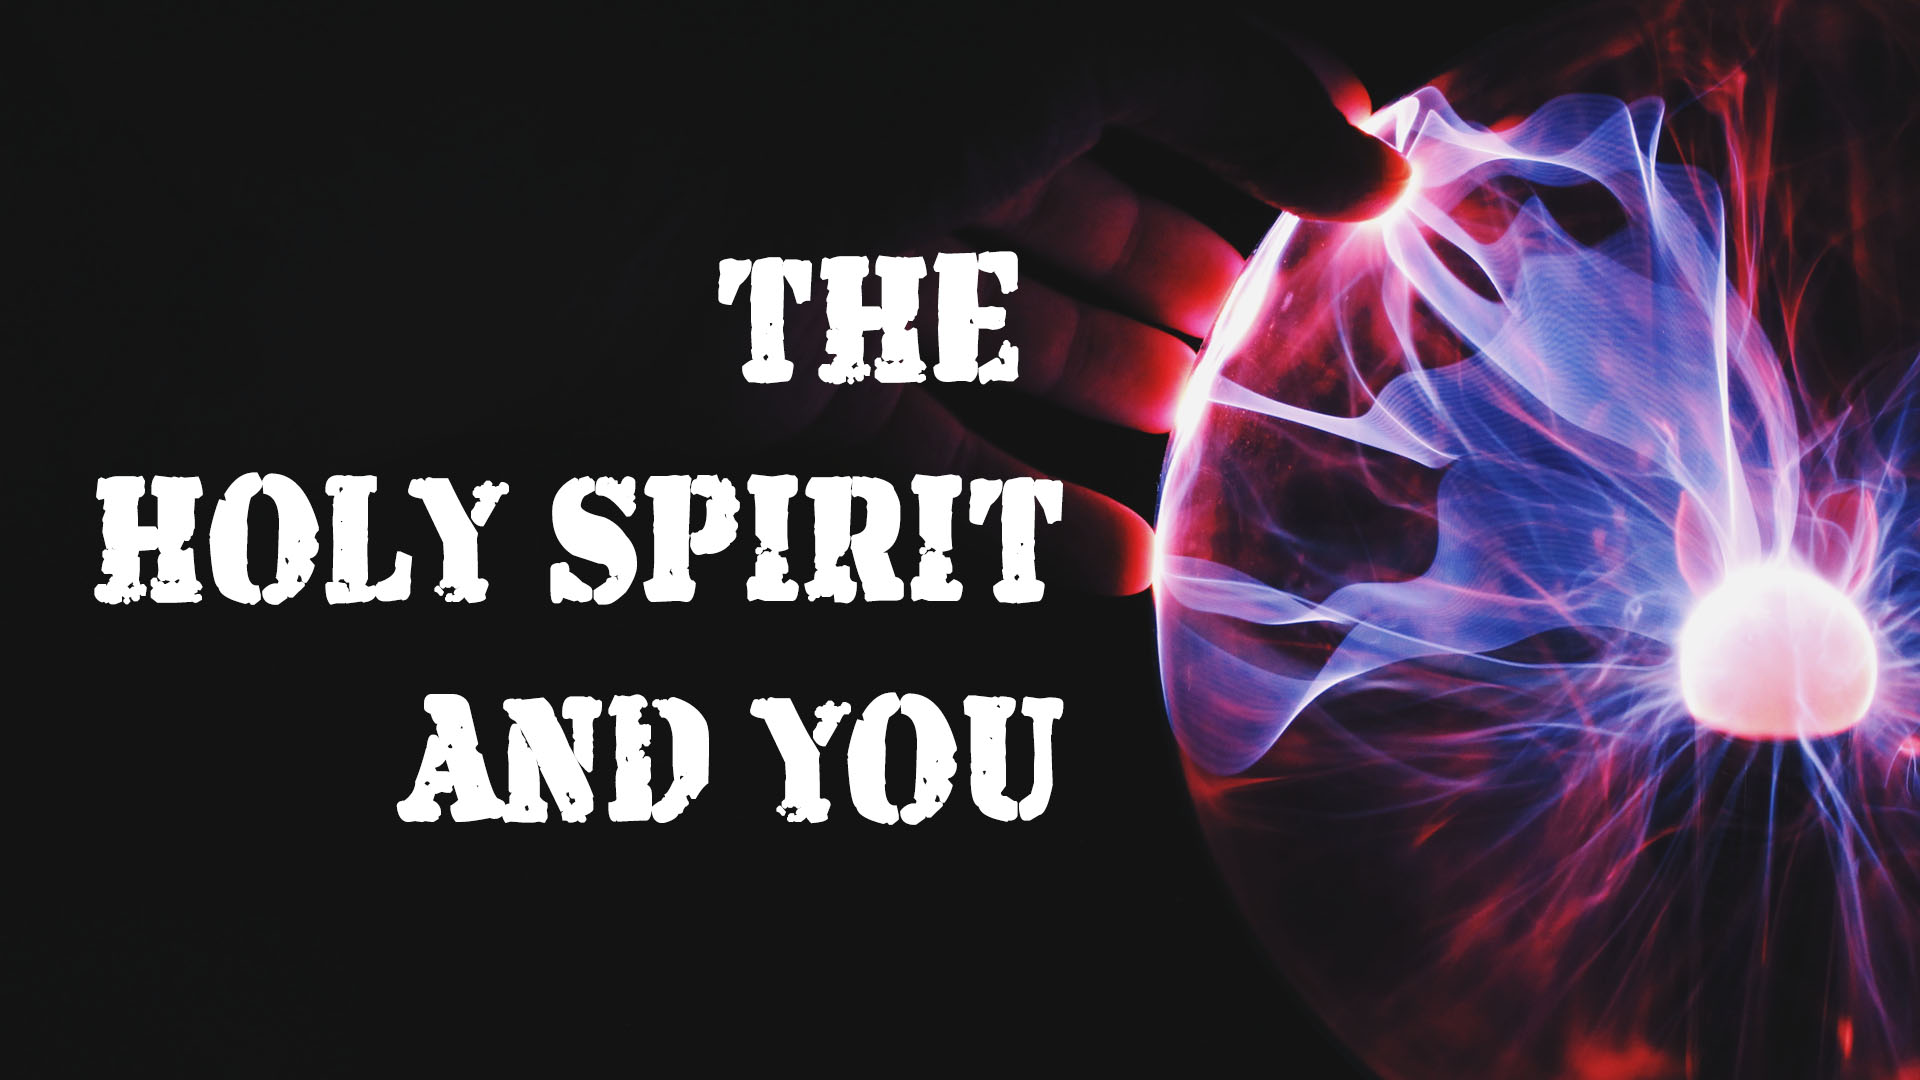 Making love with the holy spirit The Purpose And Functions Of The Holy Spirit Grace Tidings